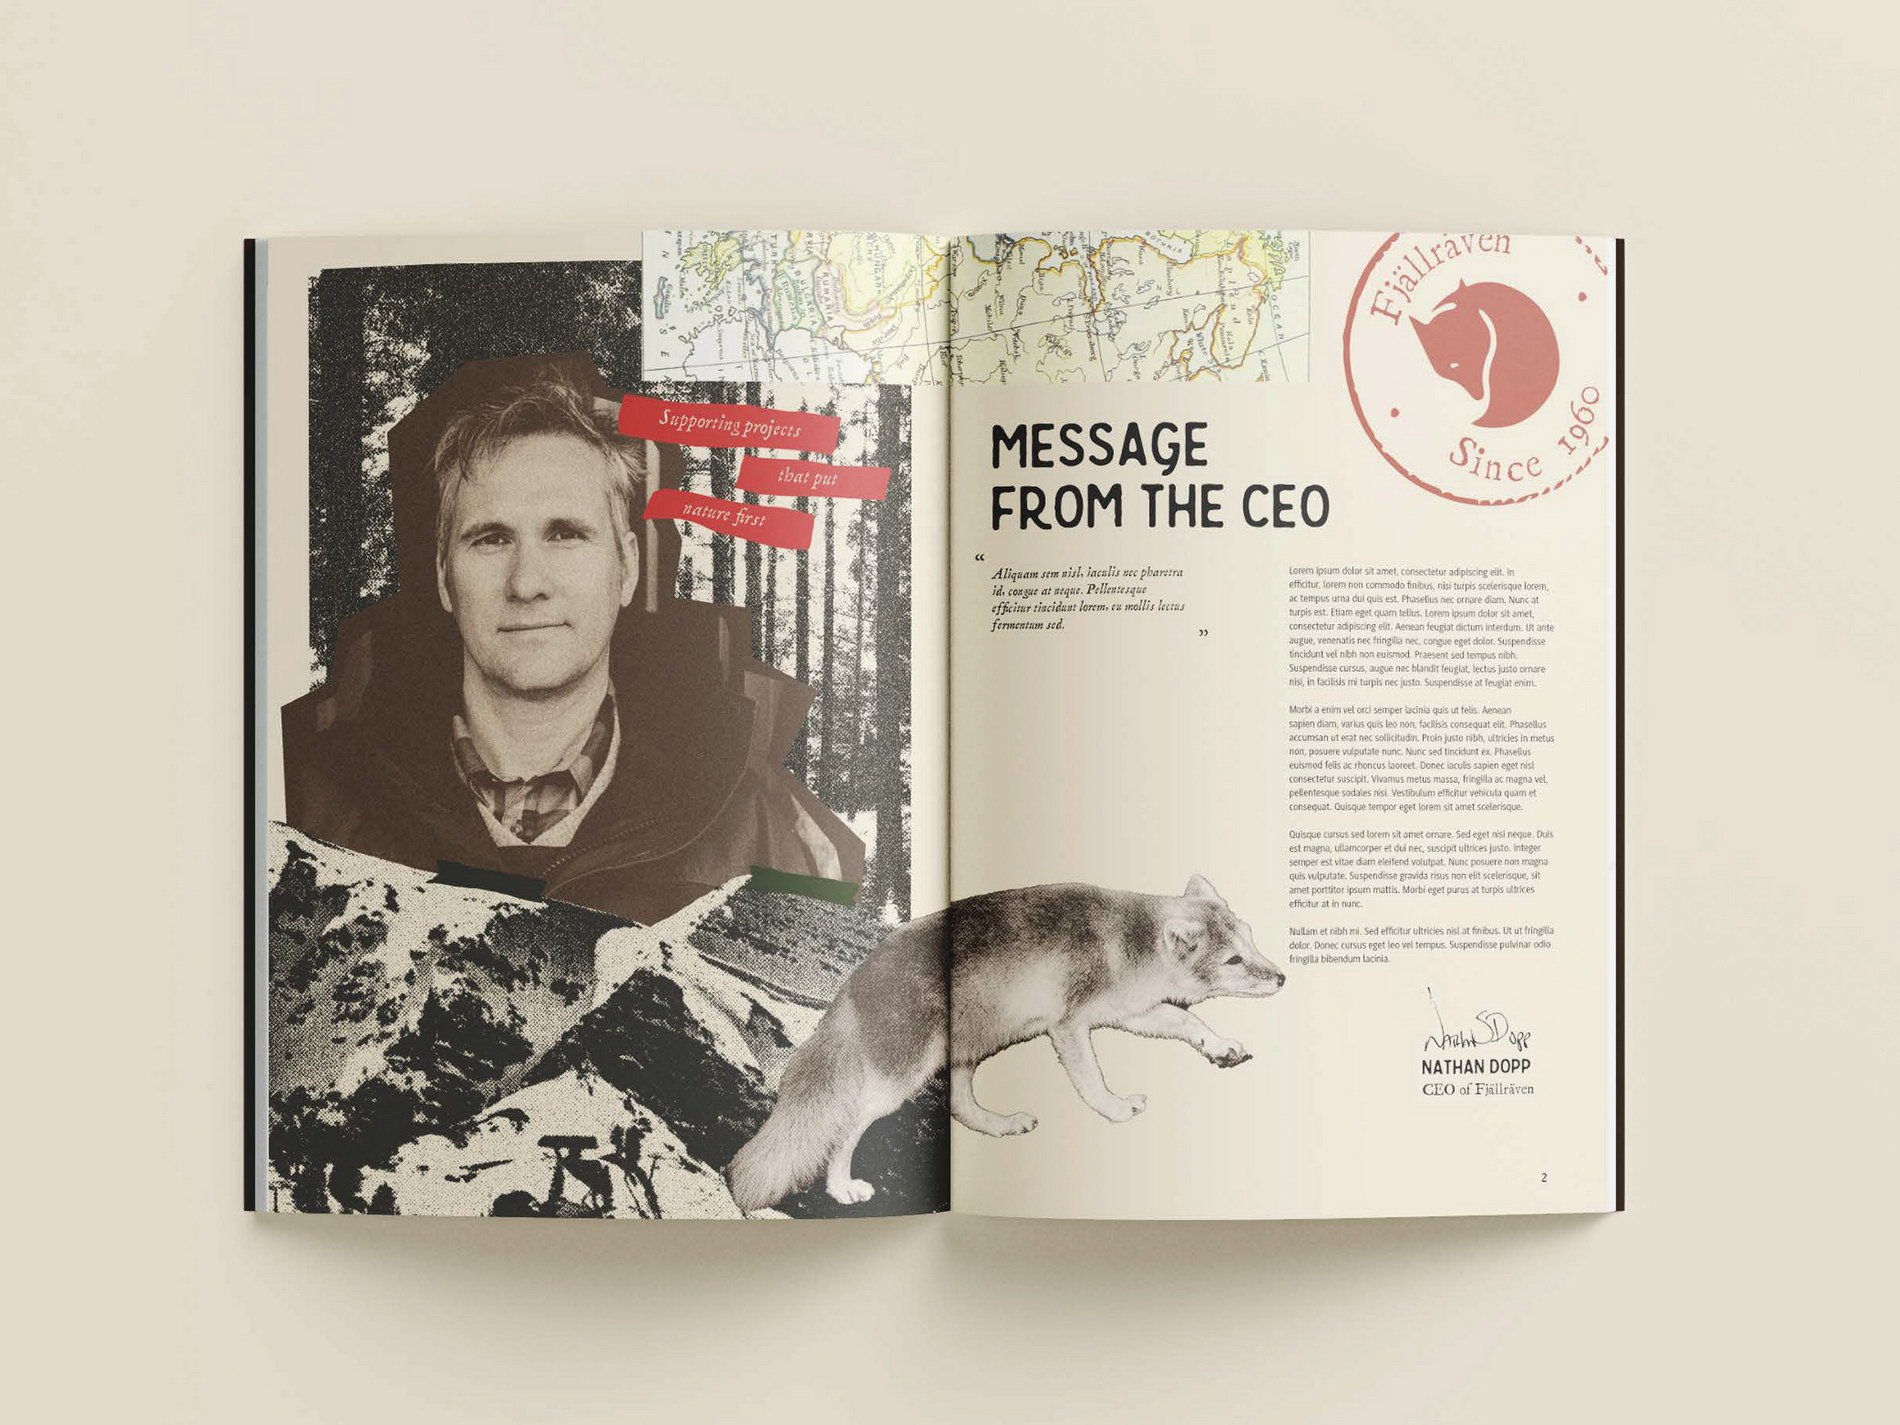 angelica-blanch--fjallraven--annual-report--community-report--communication-design--information-design--advertising--design-in-business-and-marketing--capilano-university-idea-school-of-design-2.jpg